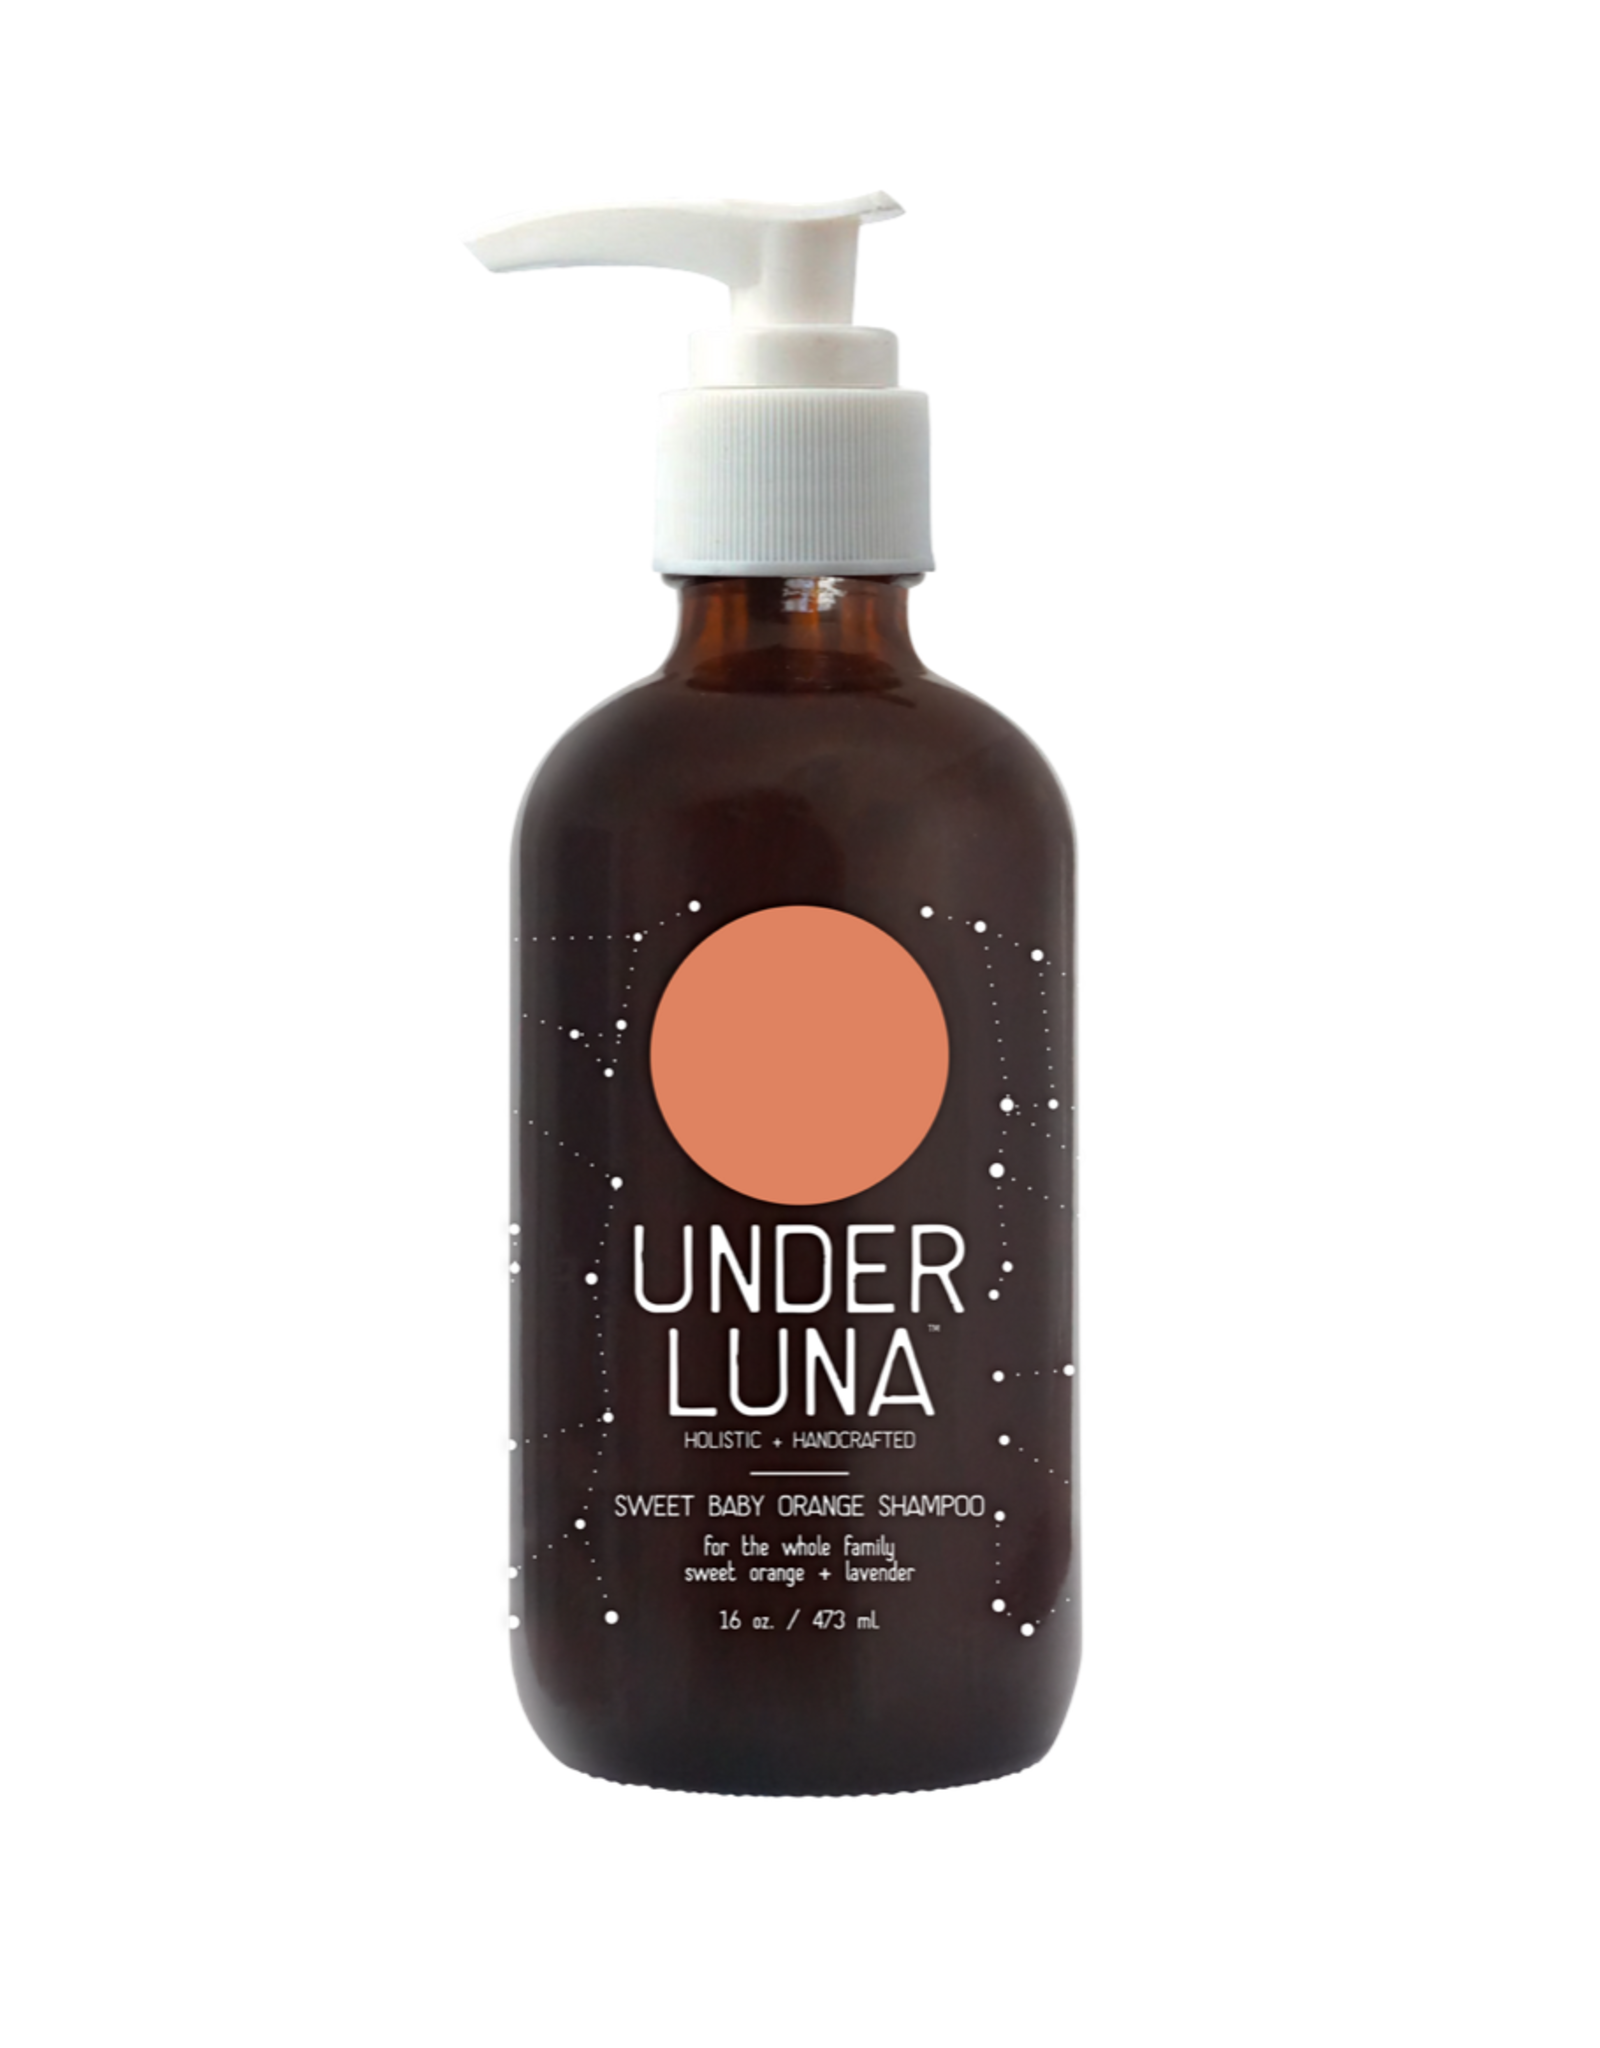 Under Luna Holistic & Handcrafted Shampoo 8.5oz Grounded (Formerly Sweet Baby Orange)- for the whole family